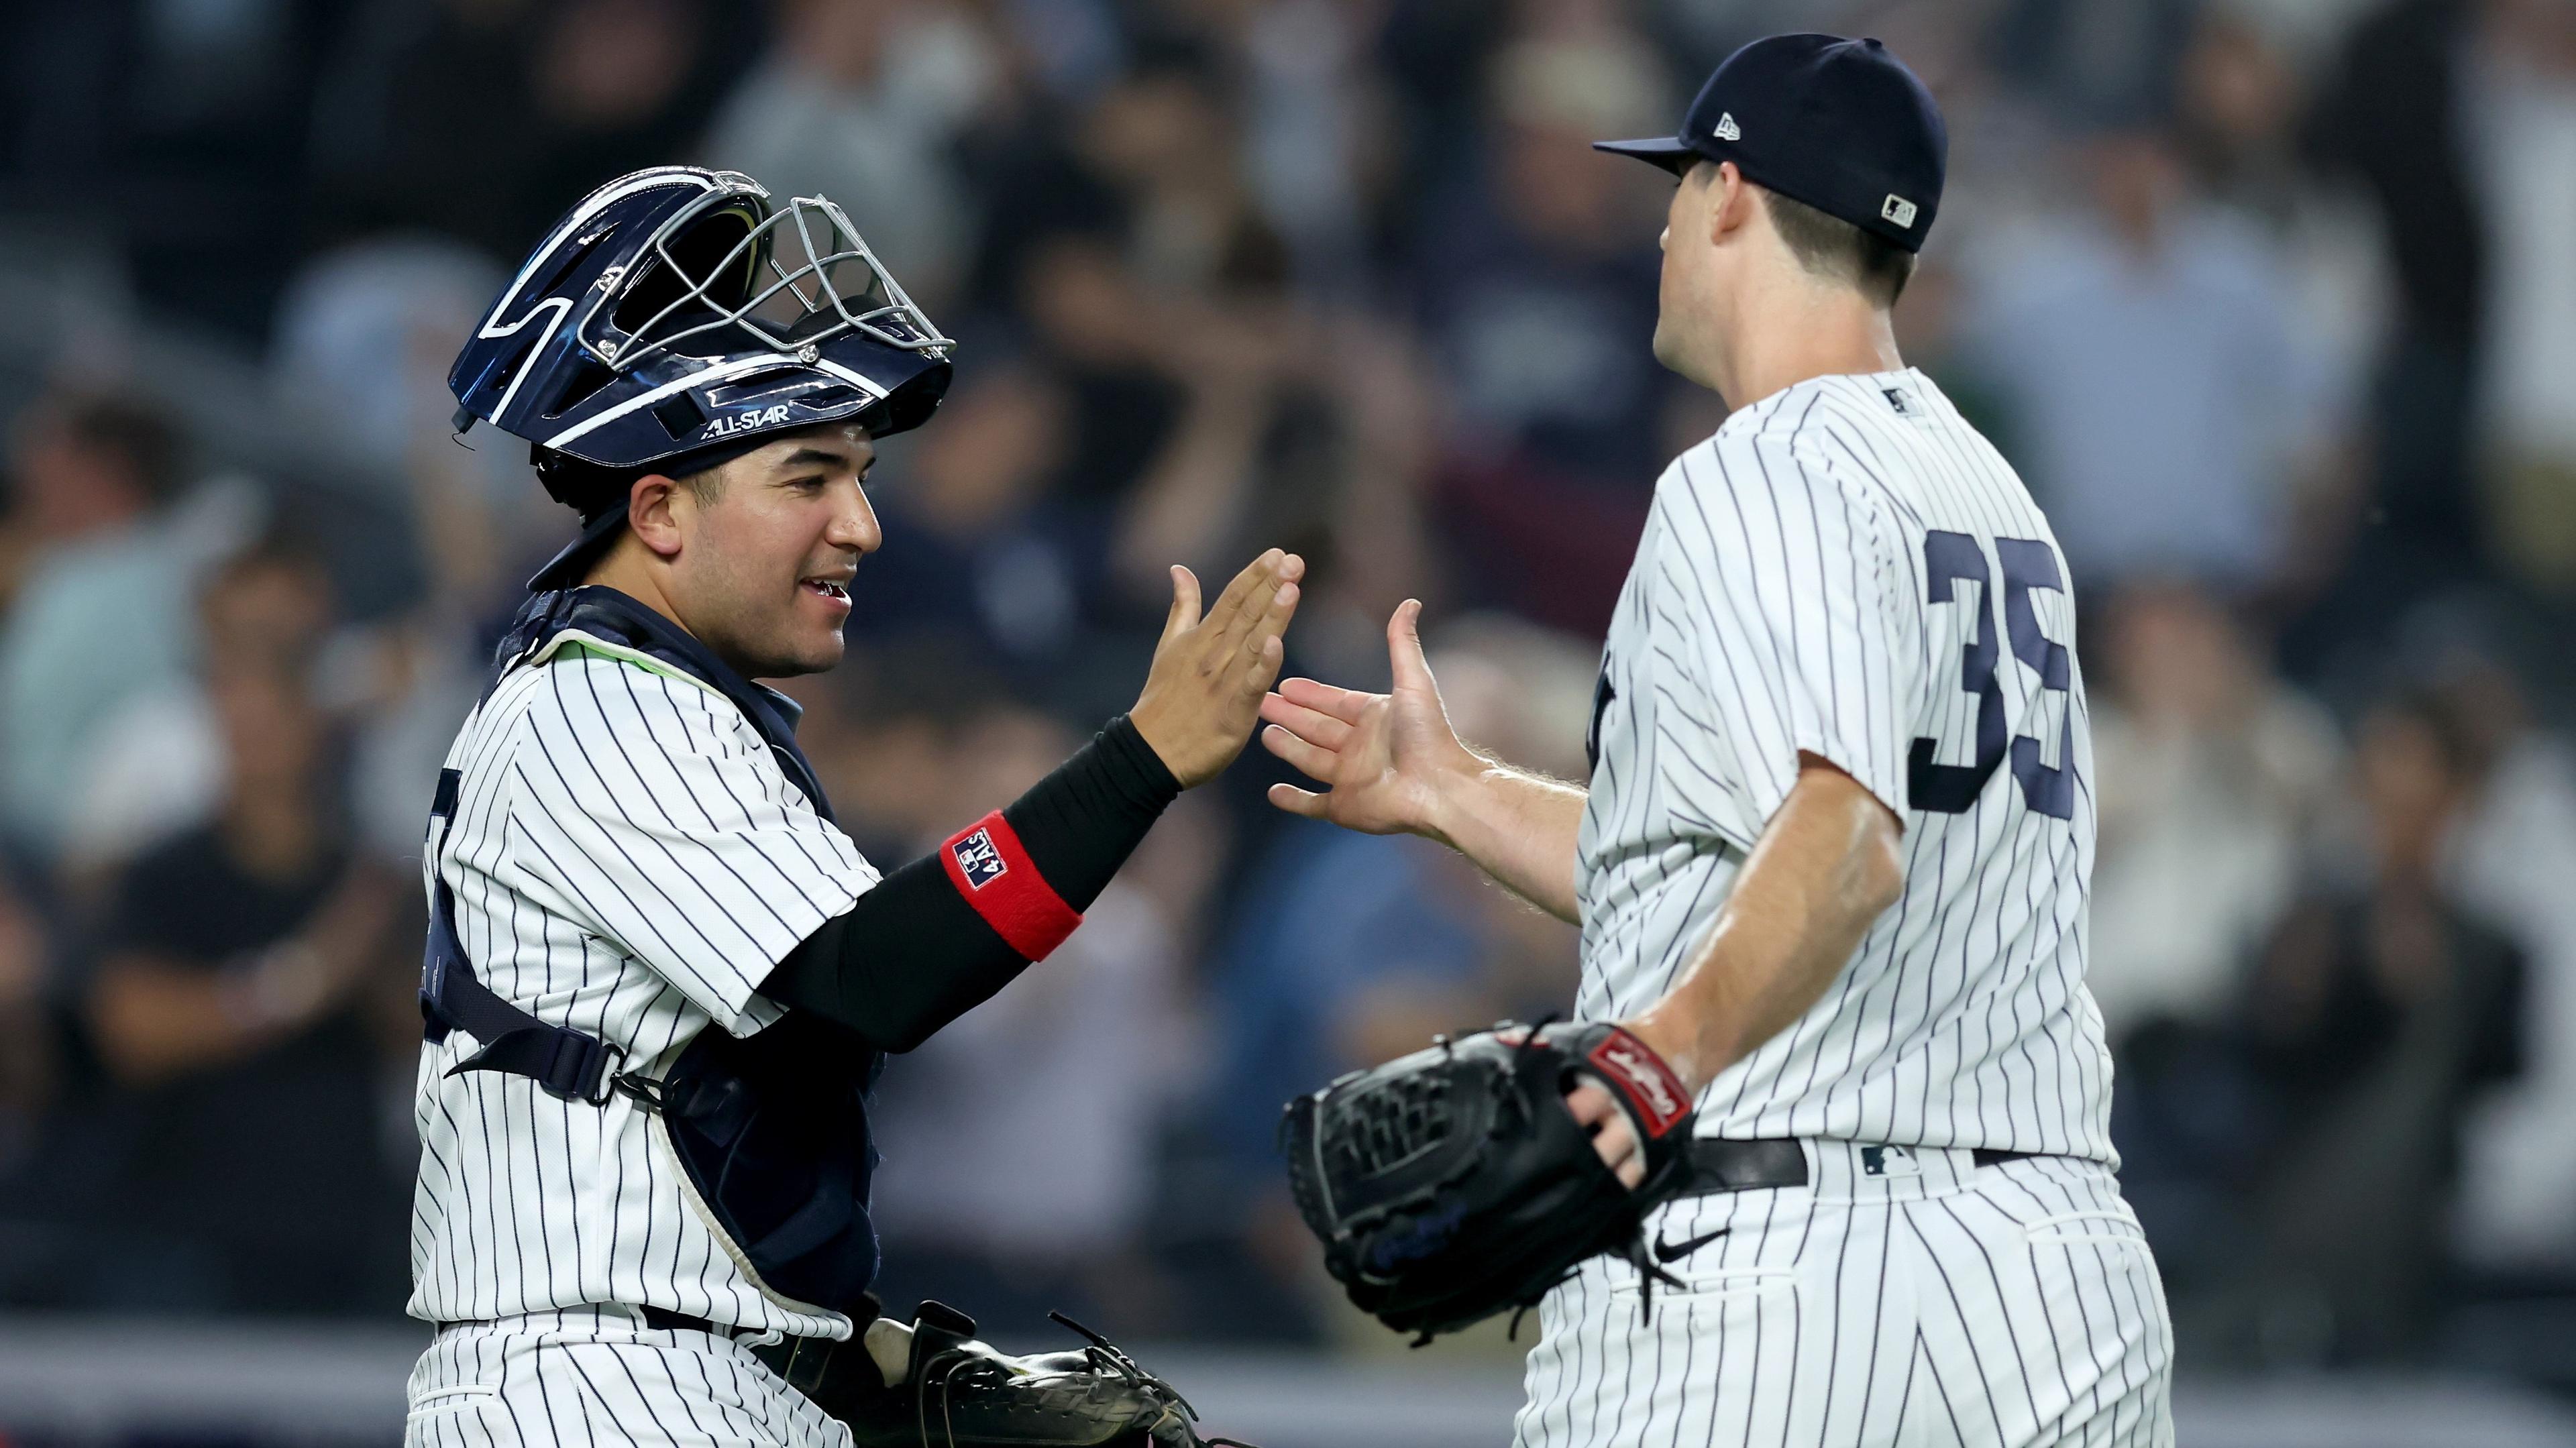 New York Yankees catcher Jose Trevino (39) and relief pitcher Clay Holmes (35) celebrate after defeating the Los Angeles Angels at Yankee Stadium. / Brad Penner-USA TODAY Sports